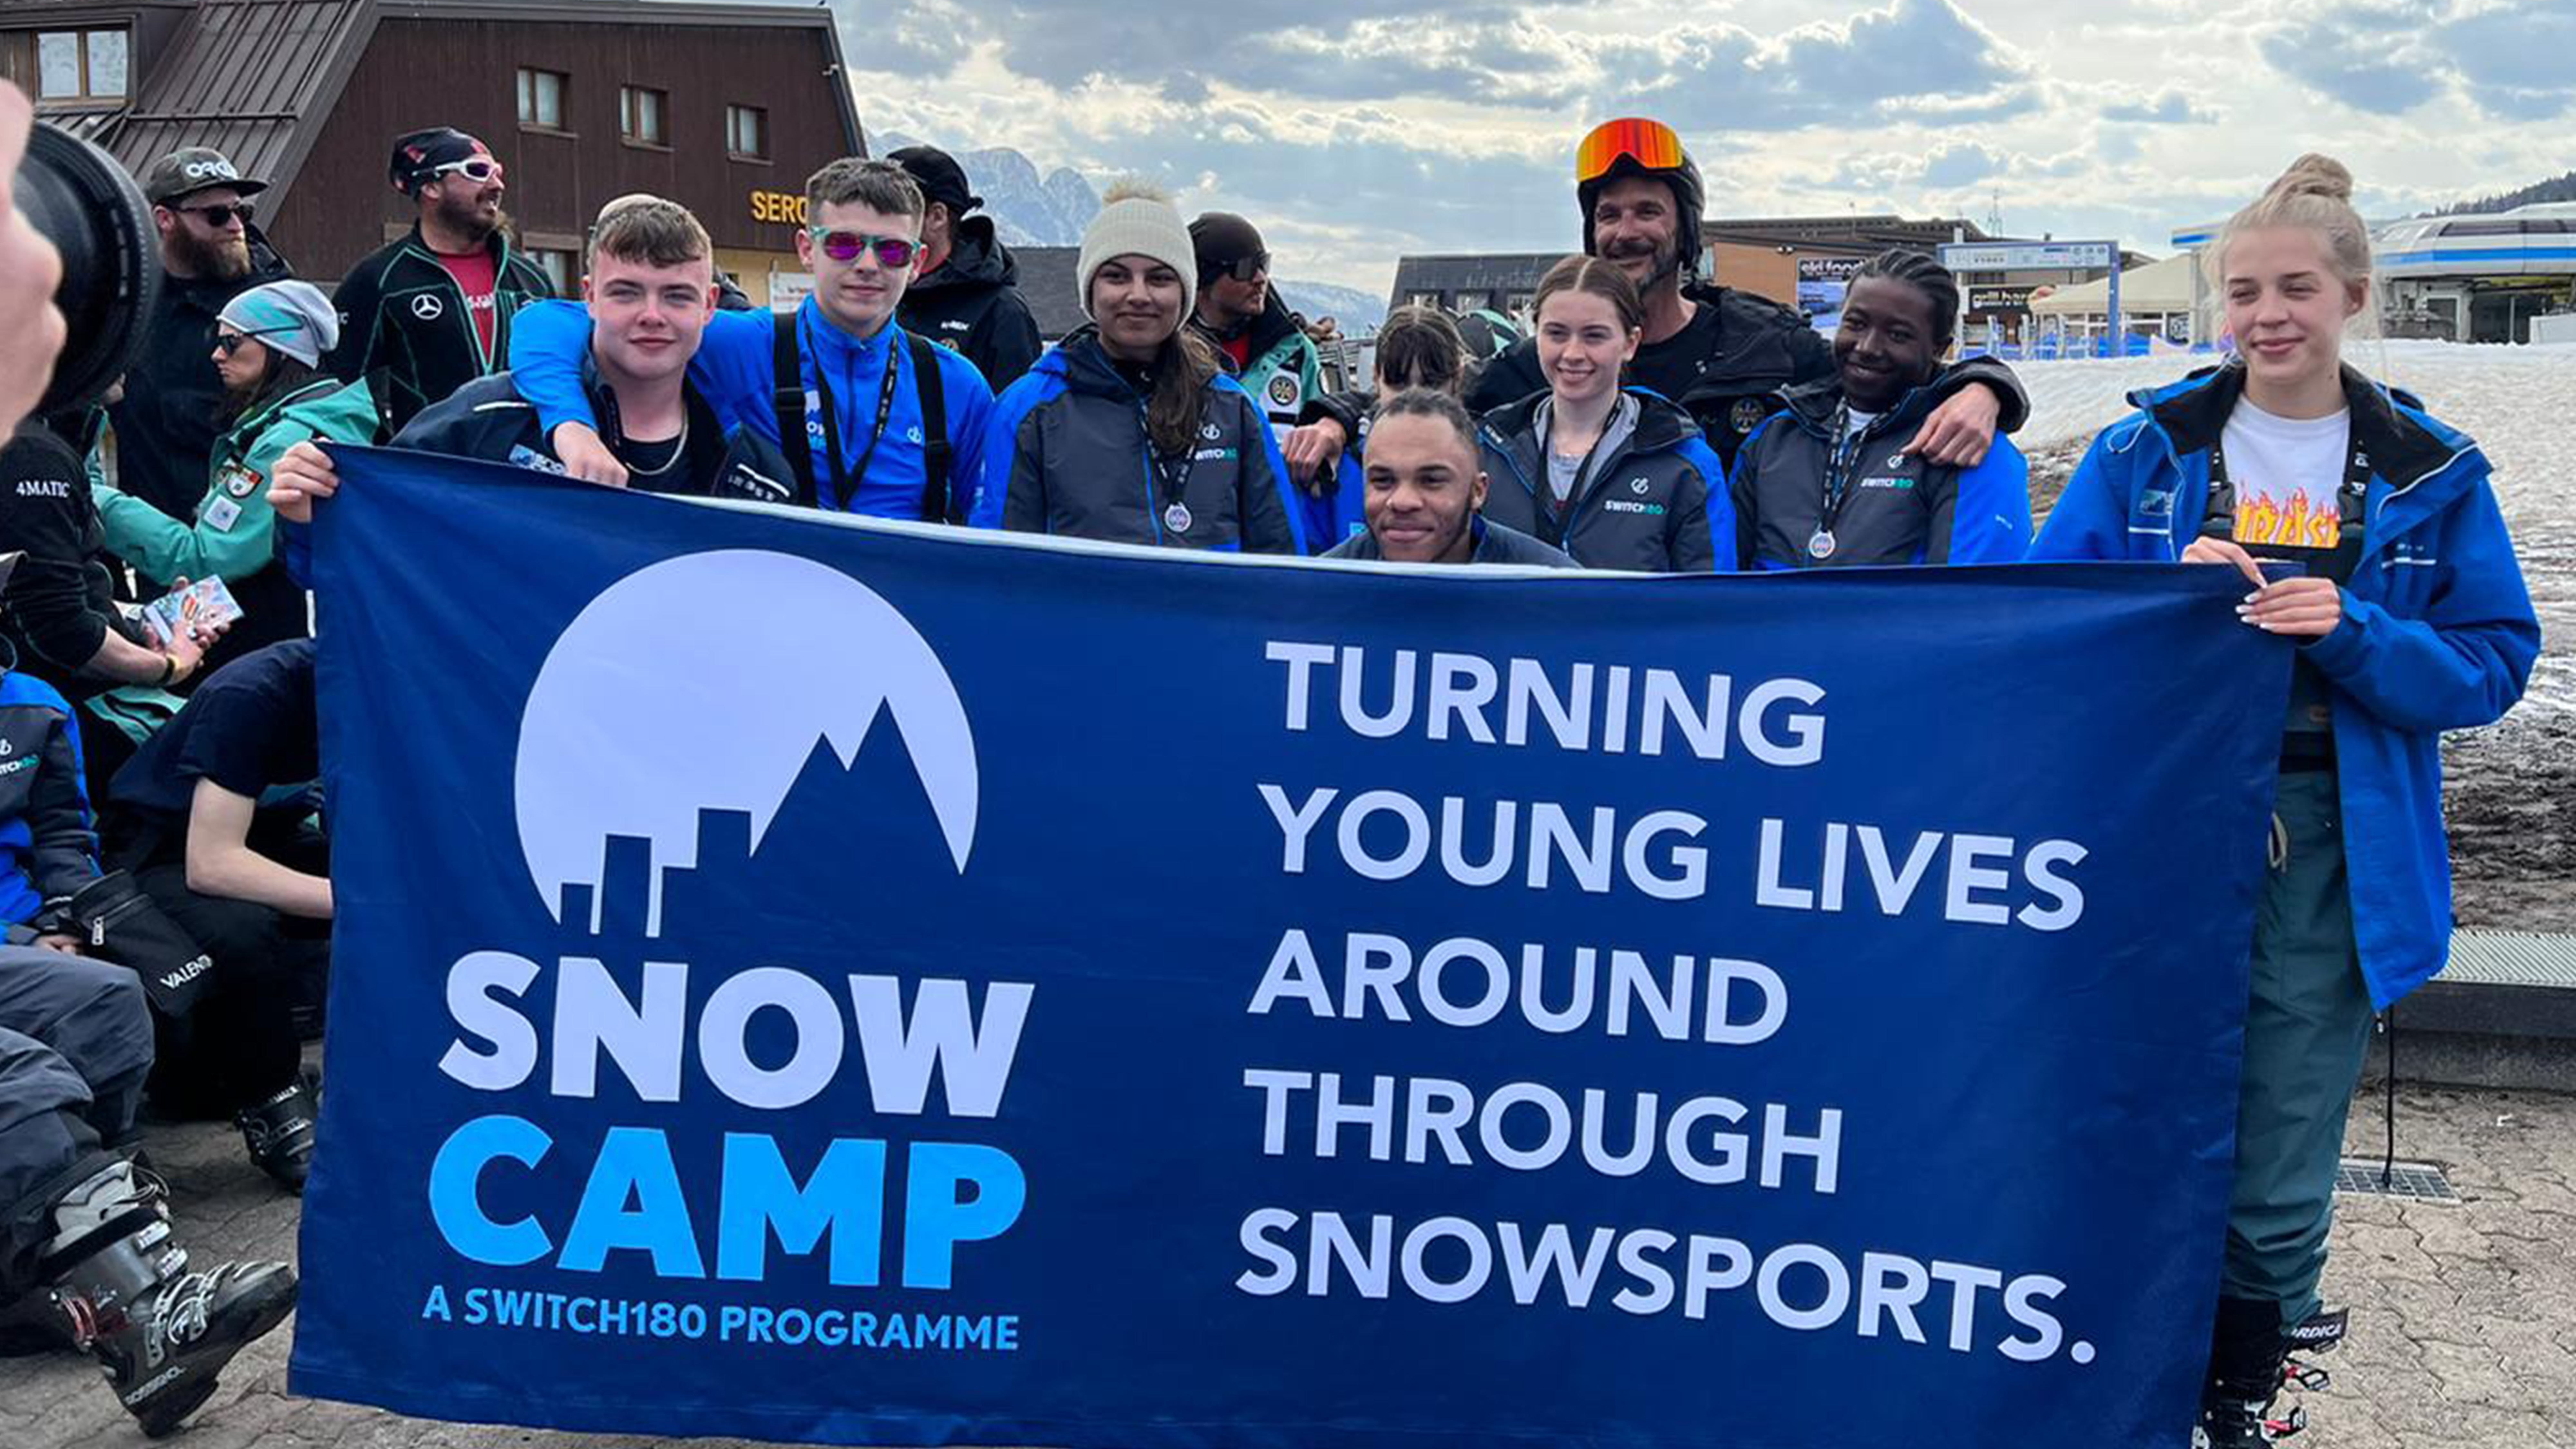 Hafsah and group with Snow Camp banner in Passo Tonale